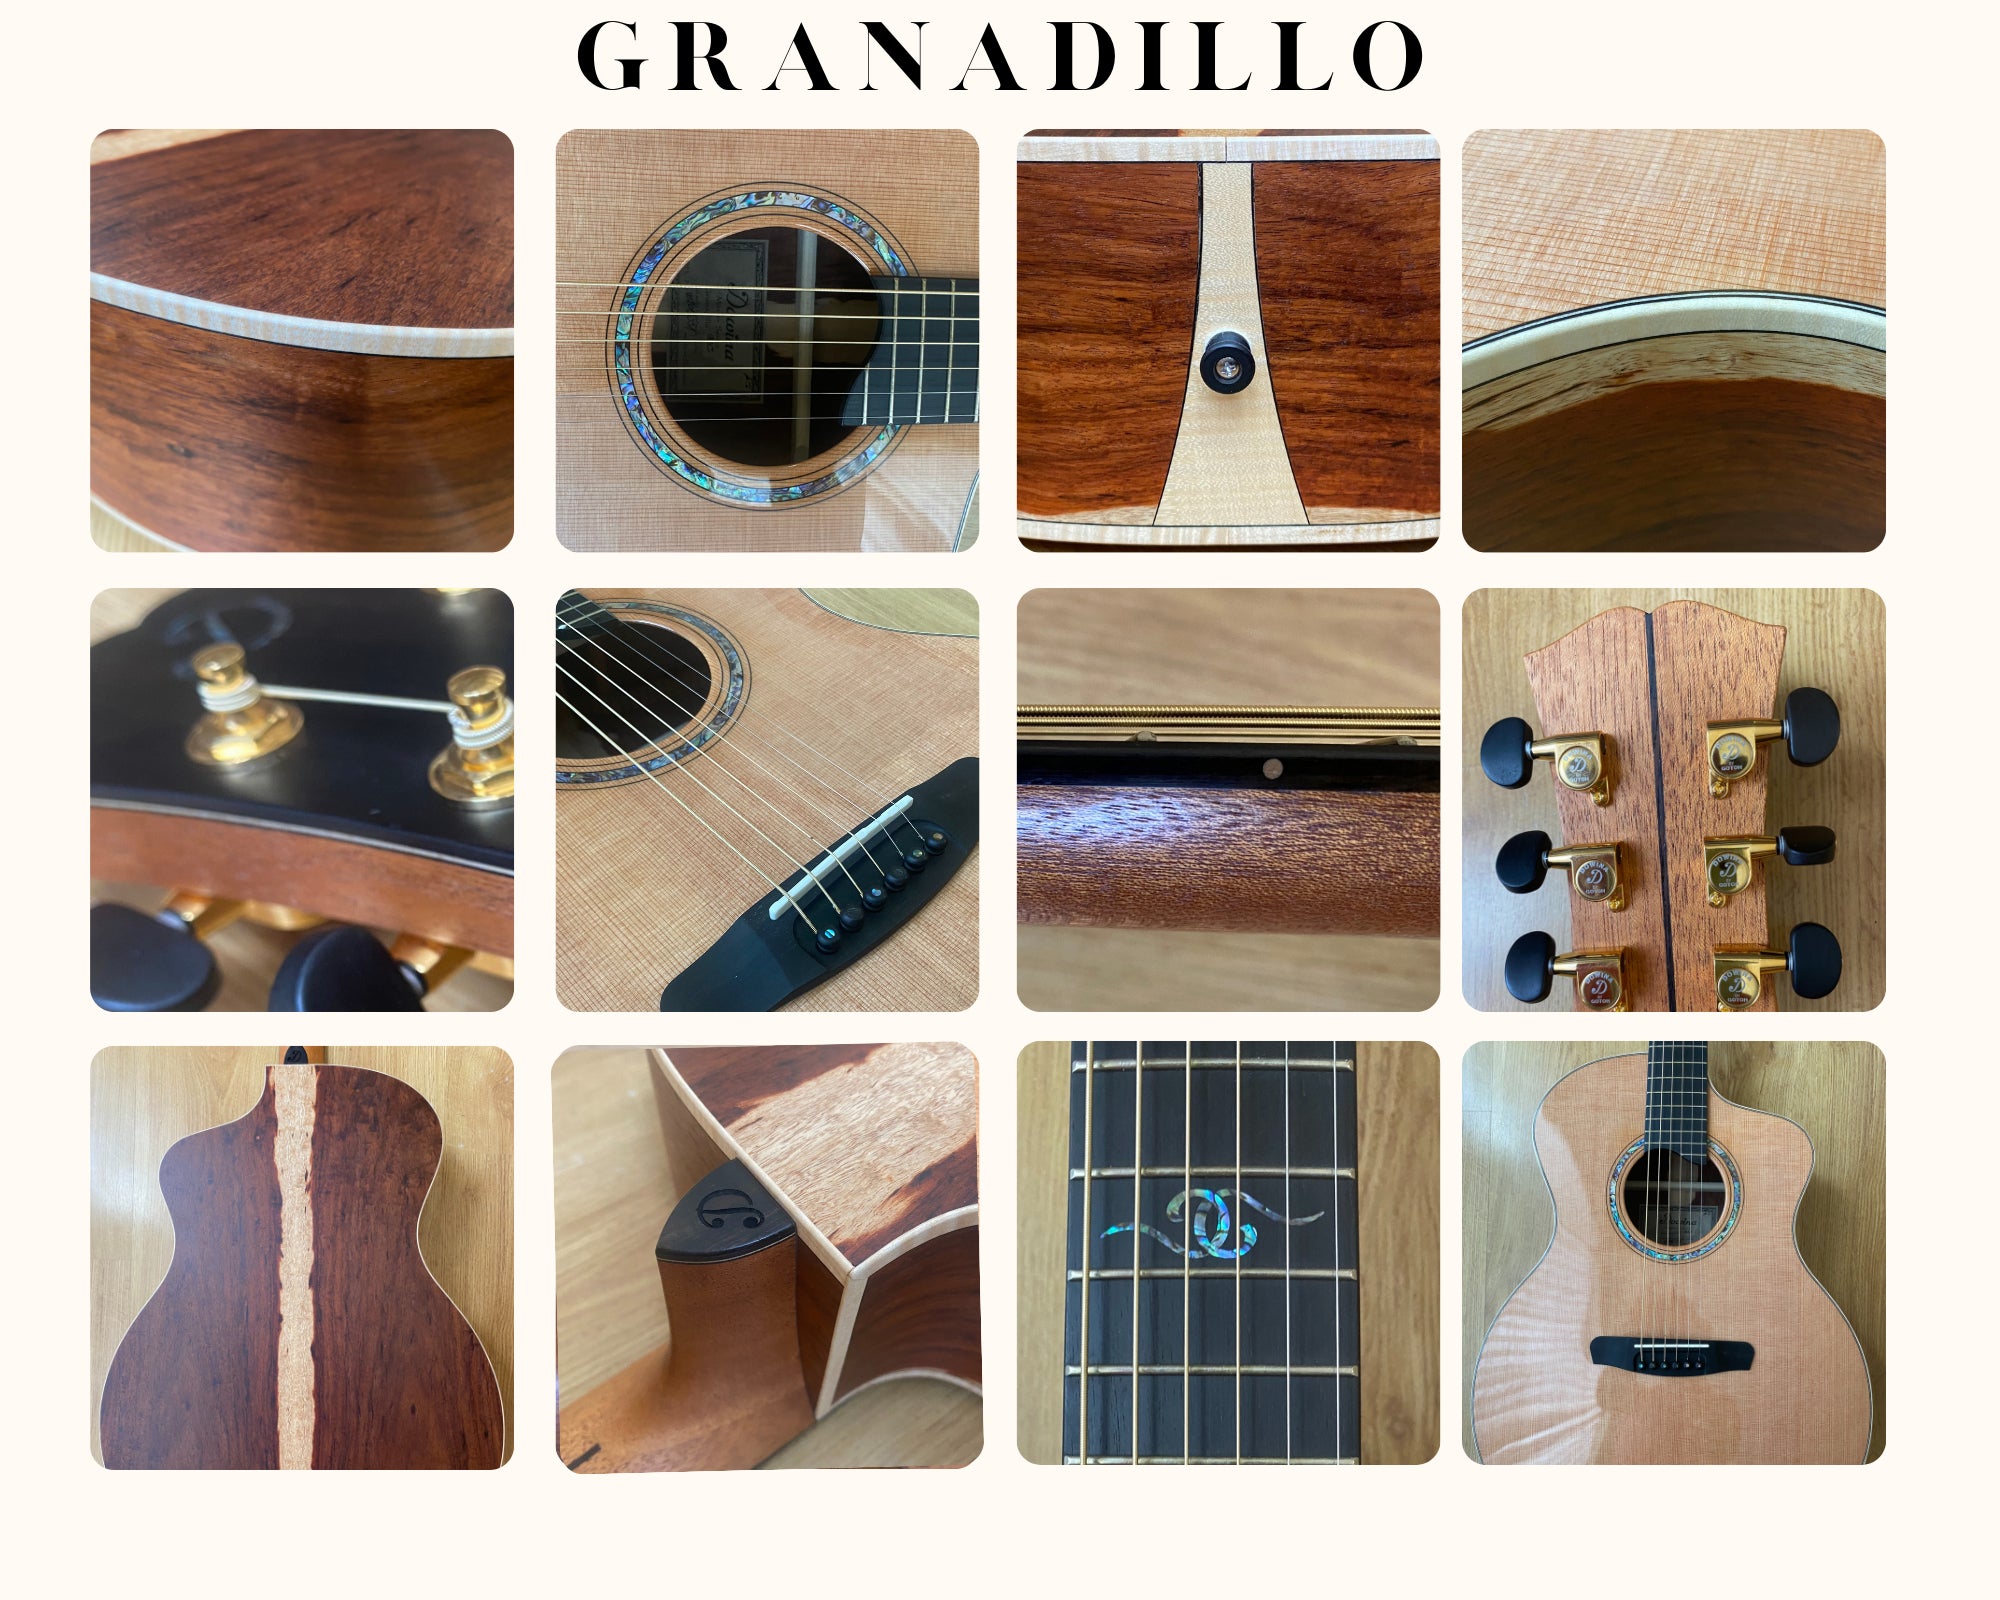 Dowina Granadillo BV Left Handed, Electro Acoustic Guitar for sale at Richards Guitars.